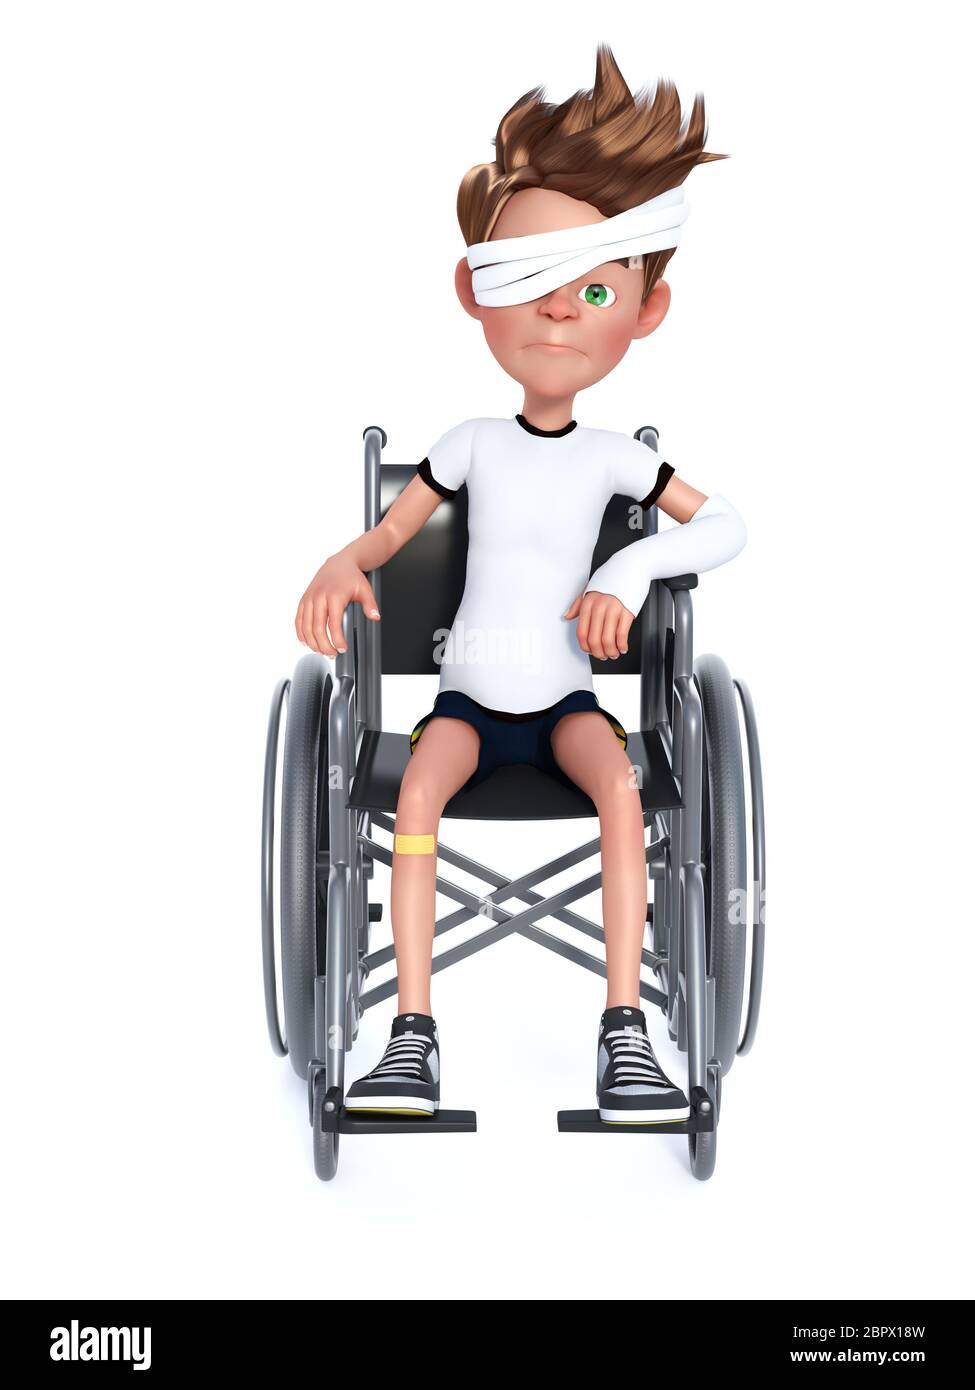 3D rendering of an unhappy cartoon boy with a broken arm and eye bandage sitting in a wheelchair. White background. Stock Photo